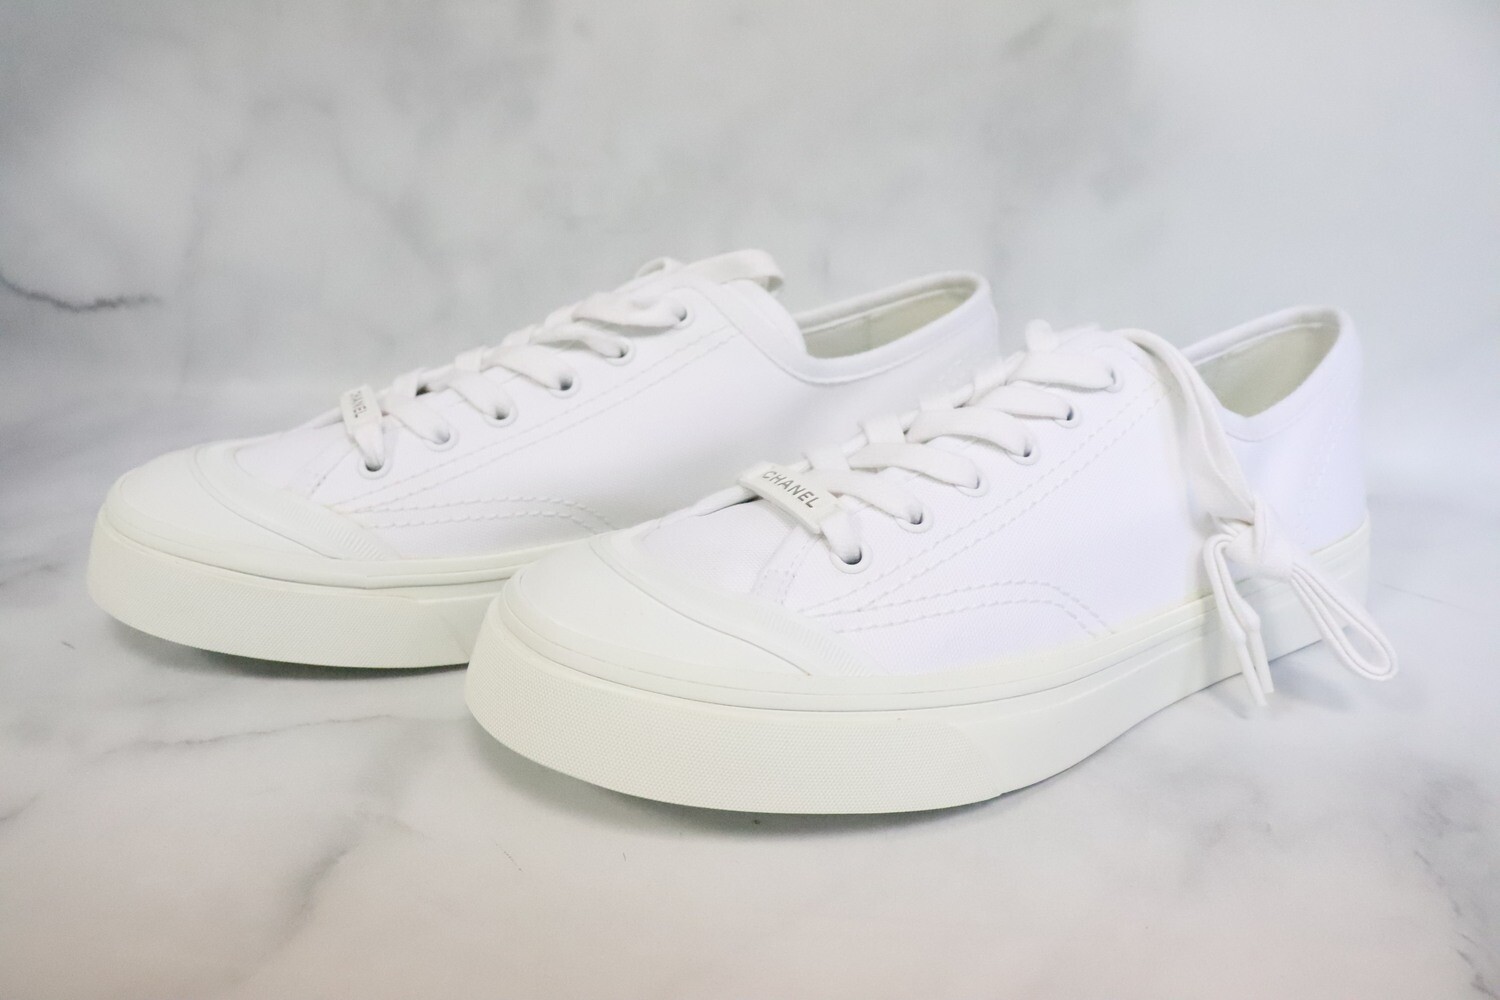 Chanel Sneakers, White, Size 38.5, New in Box MA001